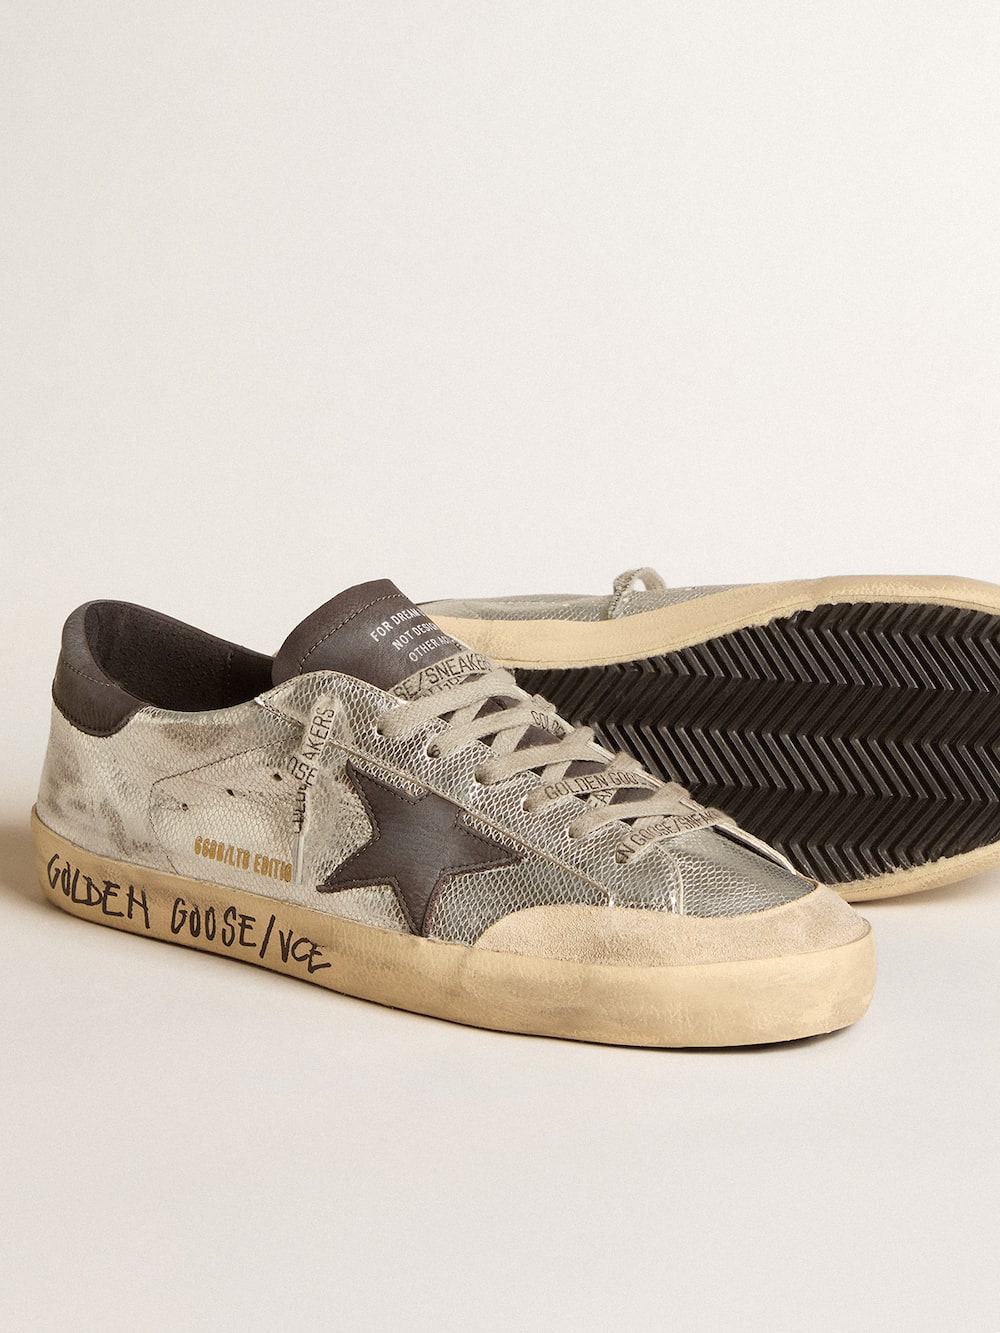 Golden Goose - Silver Super-Star LTD with black nubuck star and heel tab in 